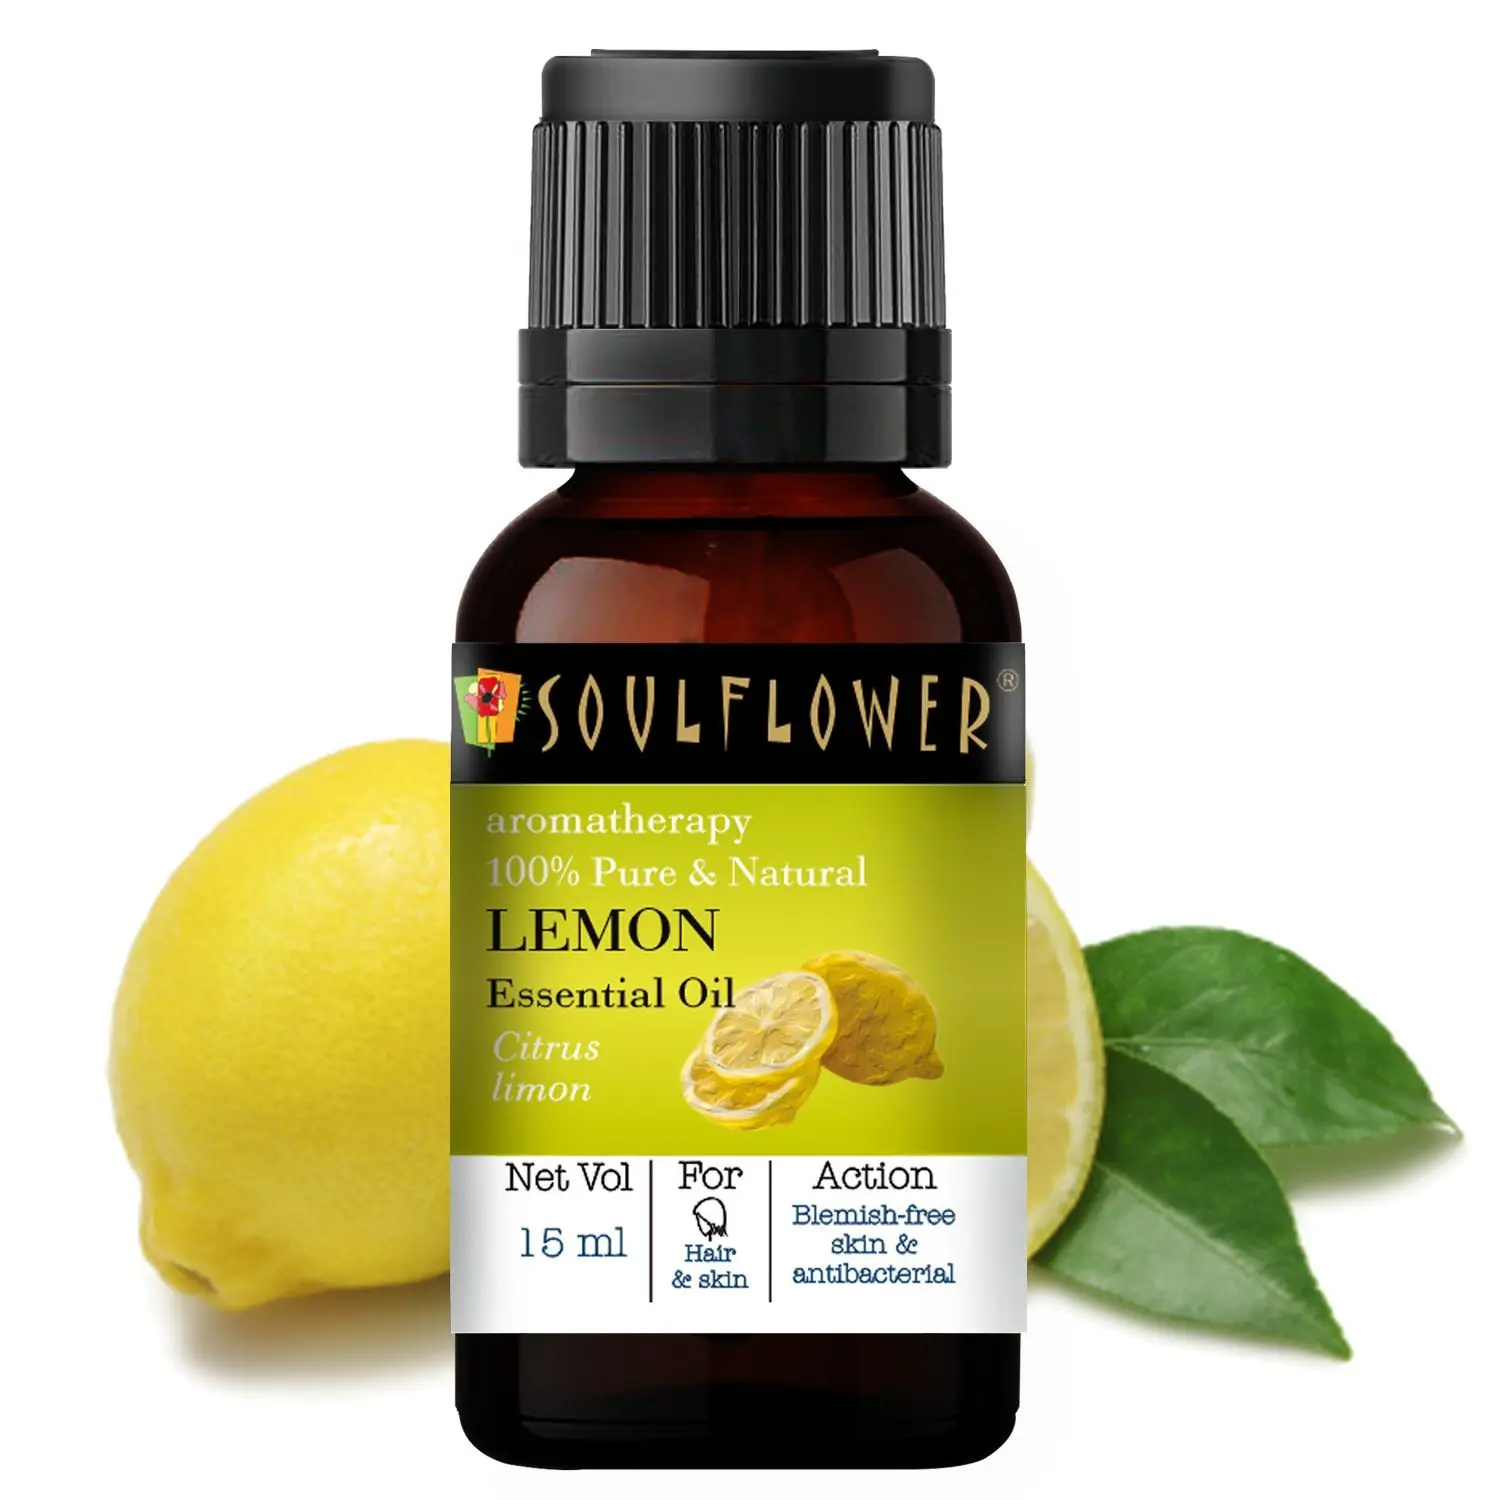 Soulflower Lemon Essential Oil, For Oily & Combination Skin & Hair Type, 100% Pure & Natural, Therapeutic Grade Aromatherapy, Citrus, 15ml